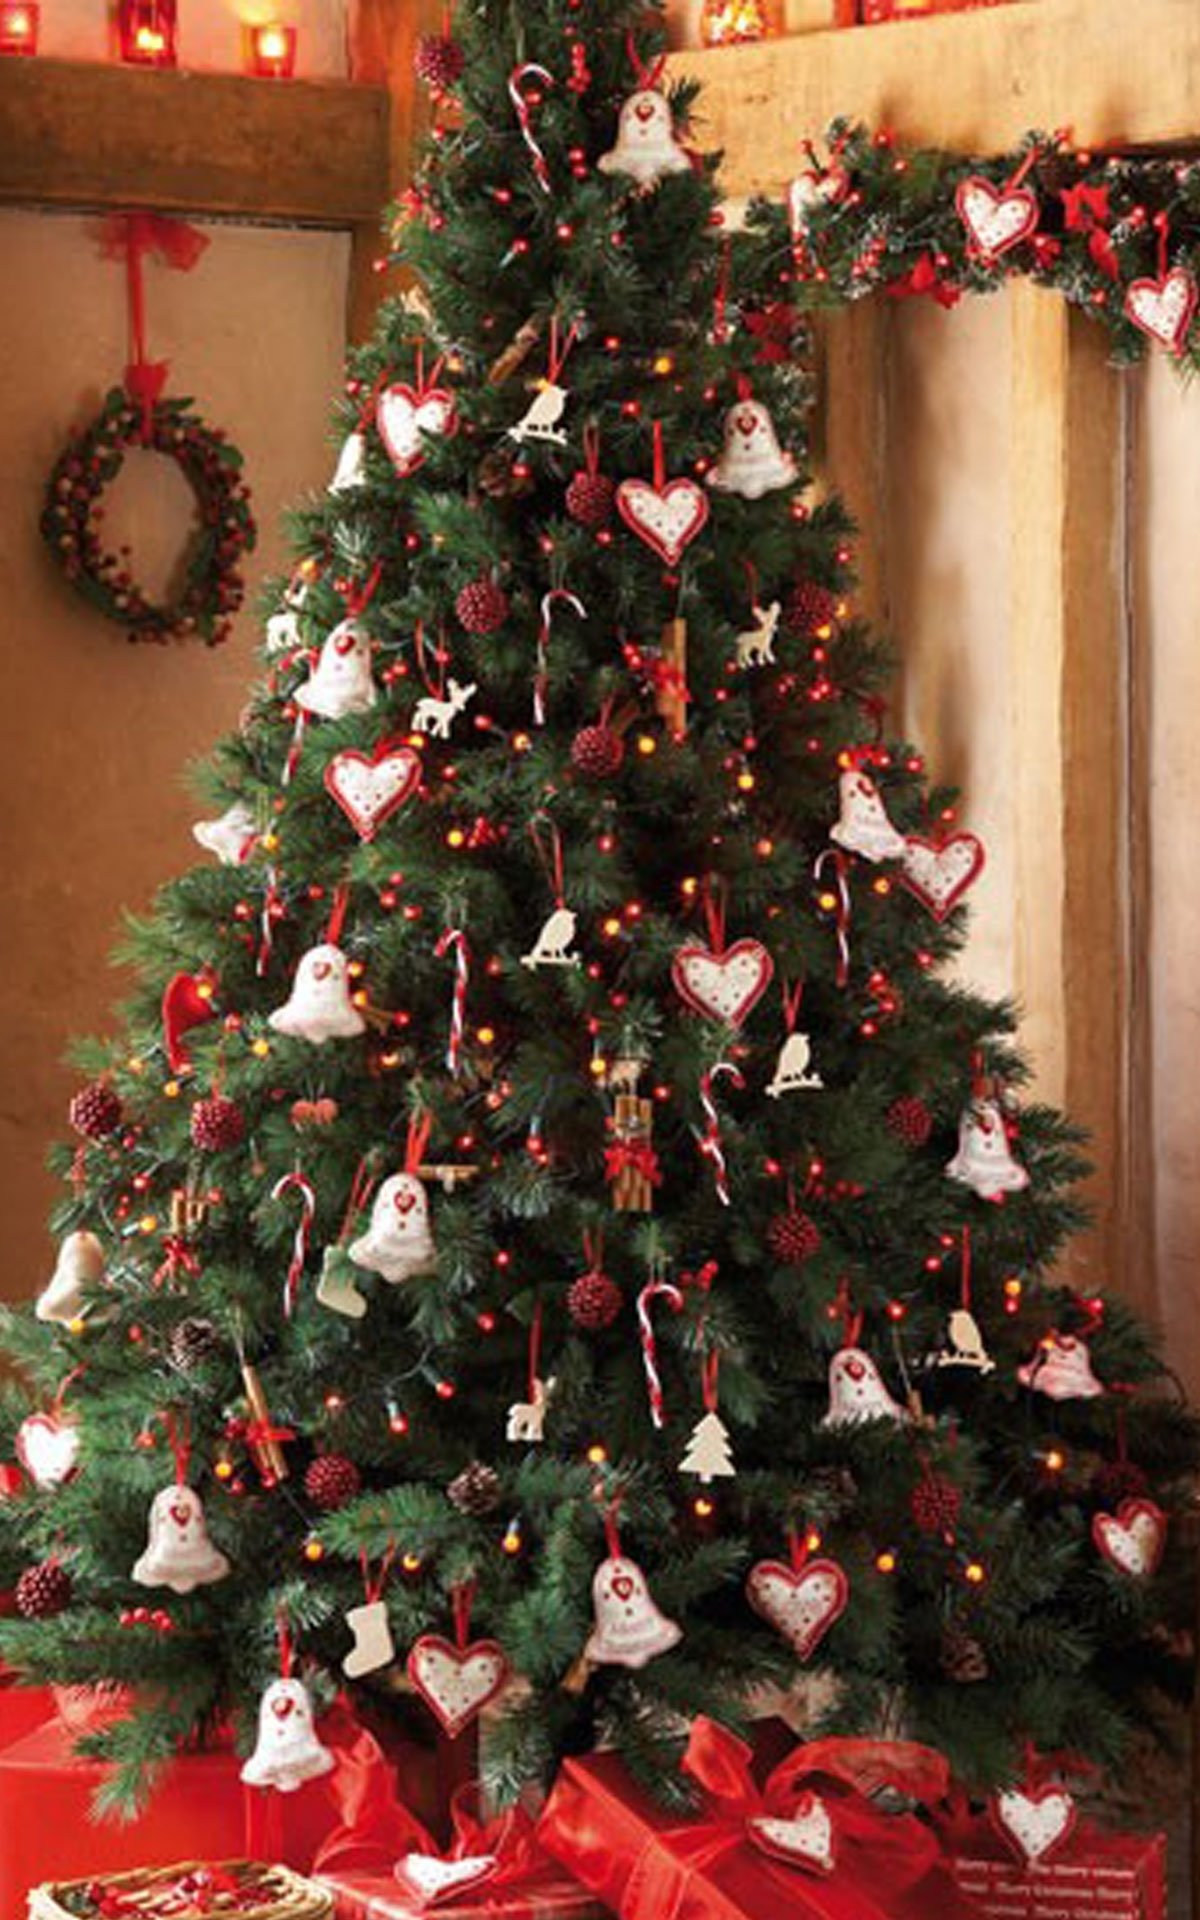 10 Awesome Simple Christmas Tree Decorating Ideas xmas tree decorating ideas with nice bell and a sign of love 2022